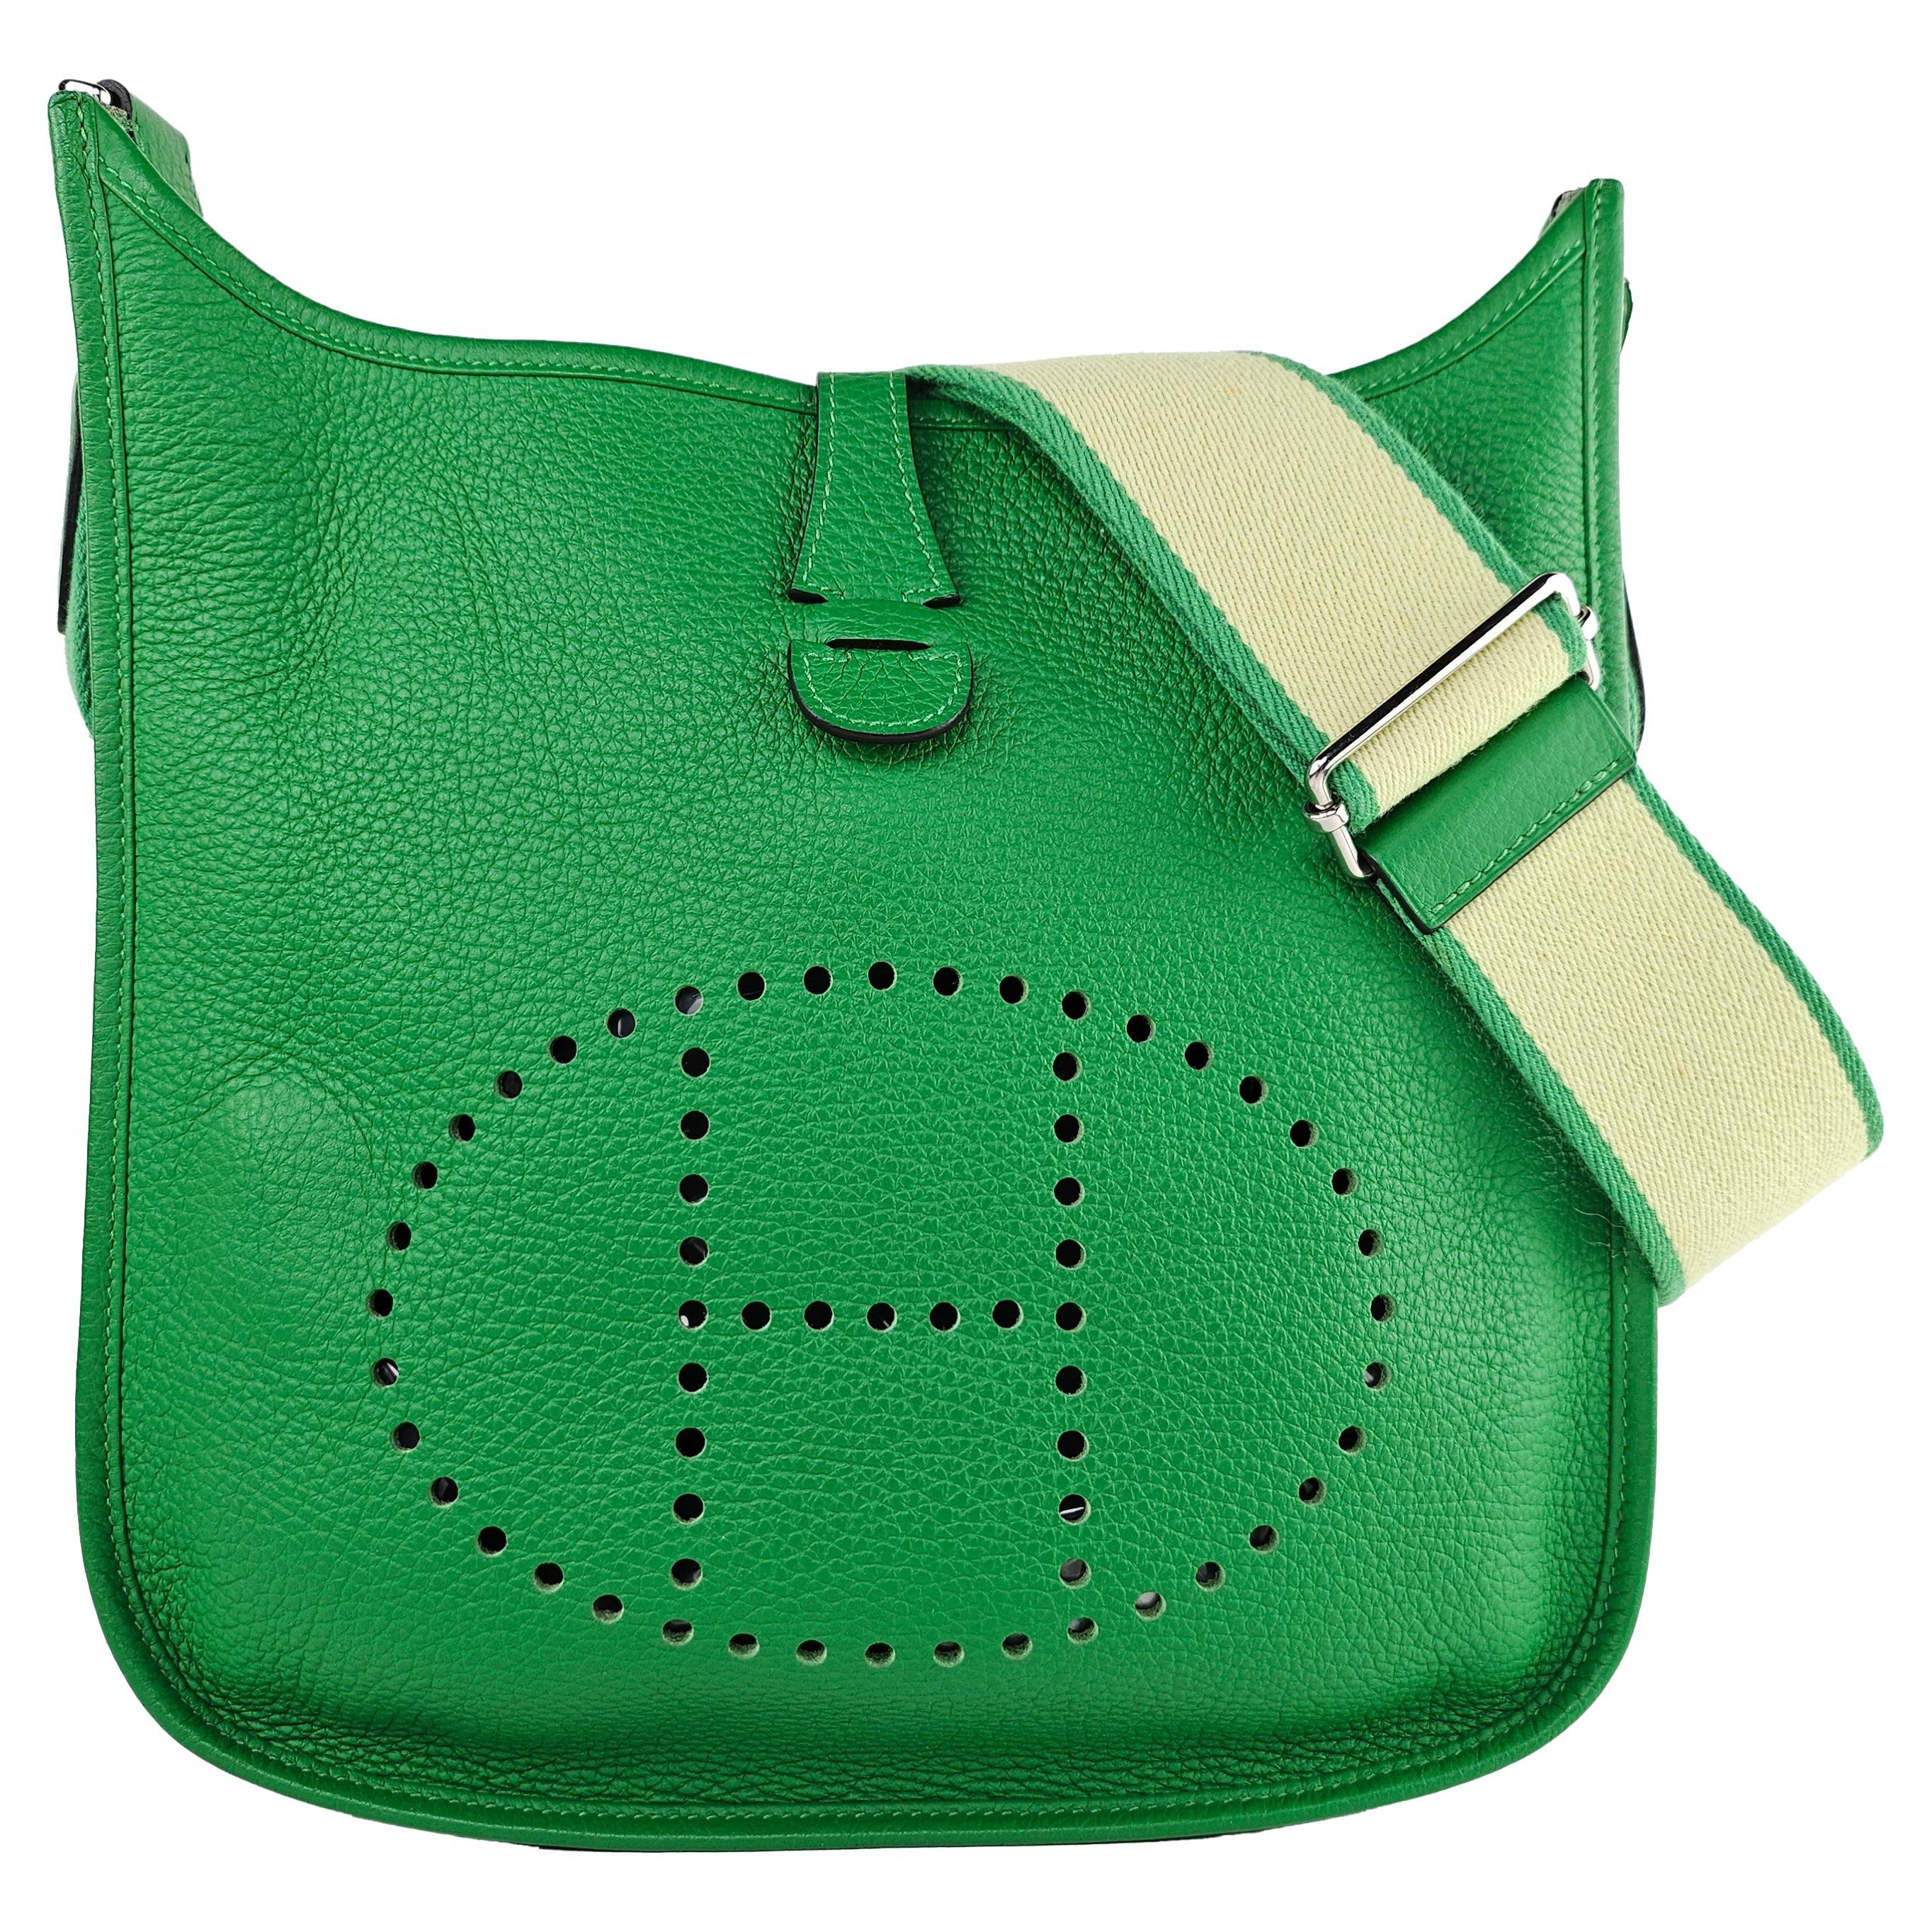 Hermes Evelyne PM III Bamboo Green Clemence Leather Amazone Crossbody Hermes For Sale